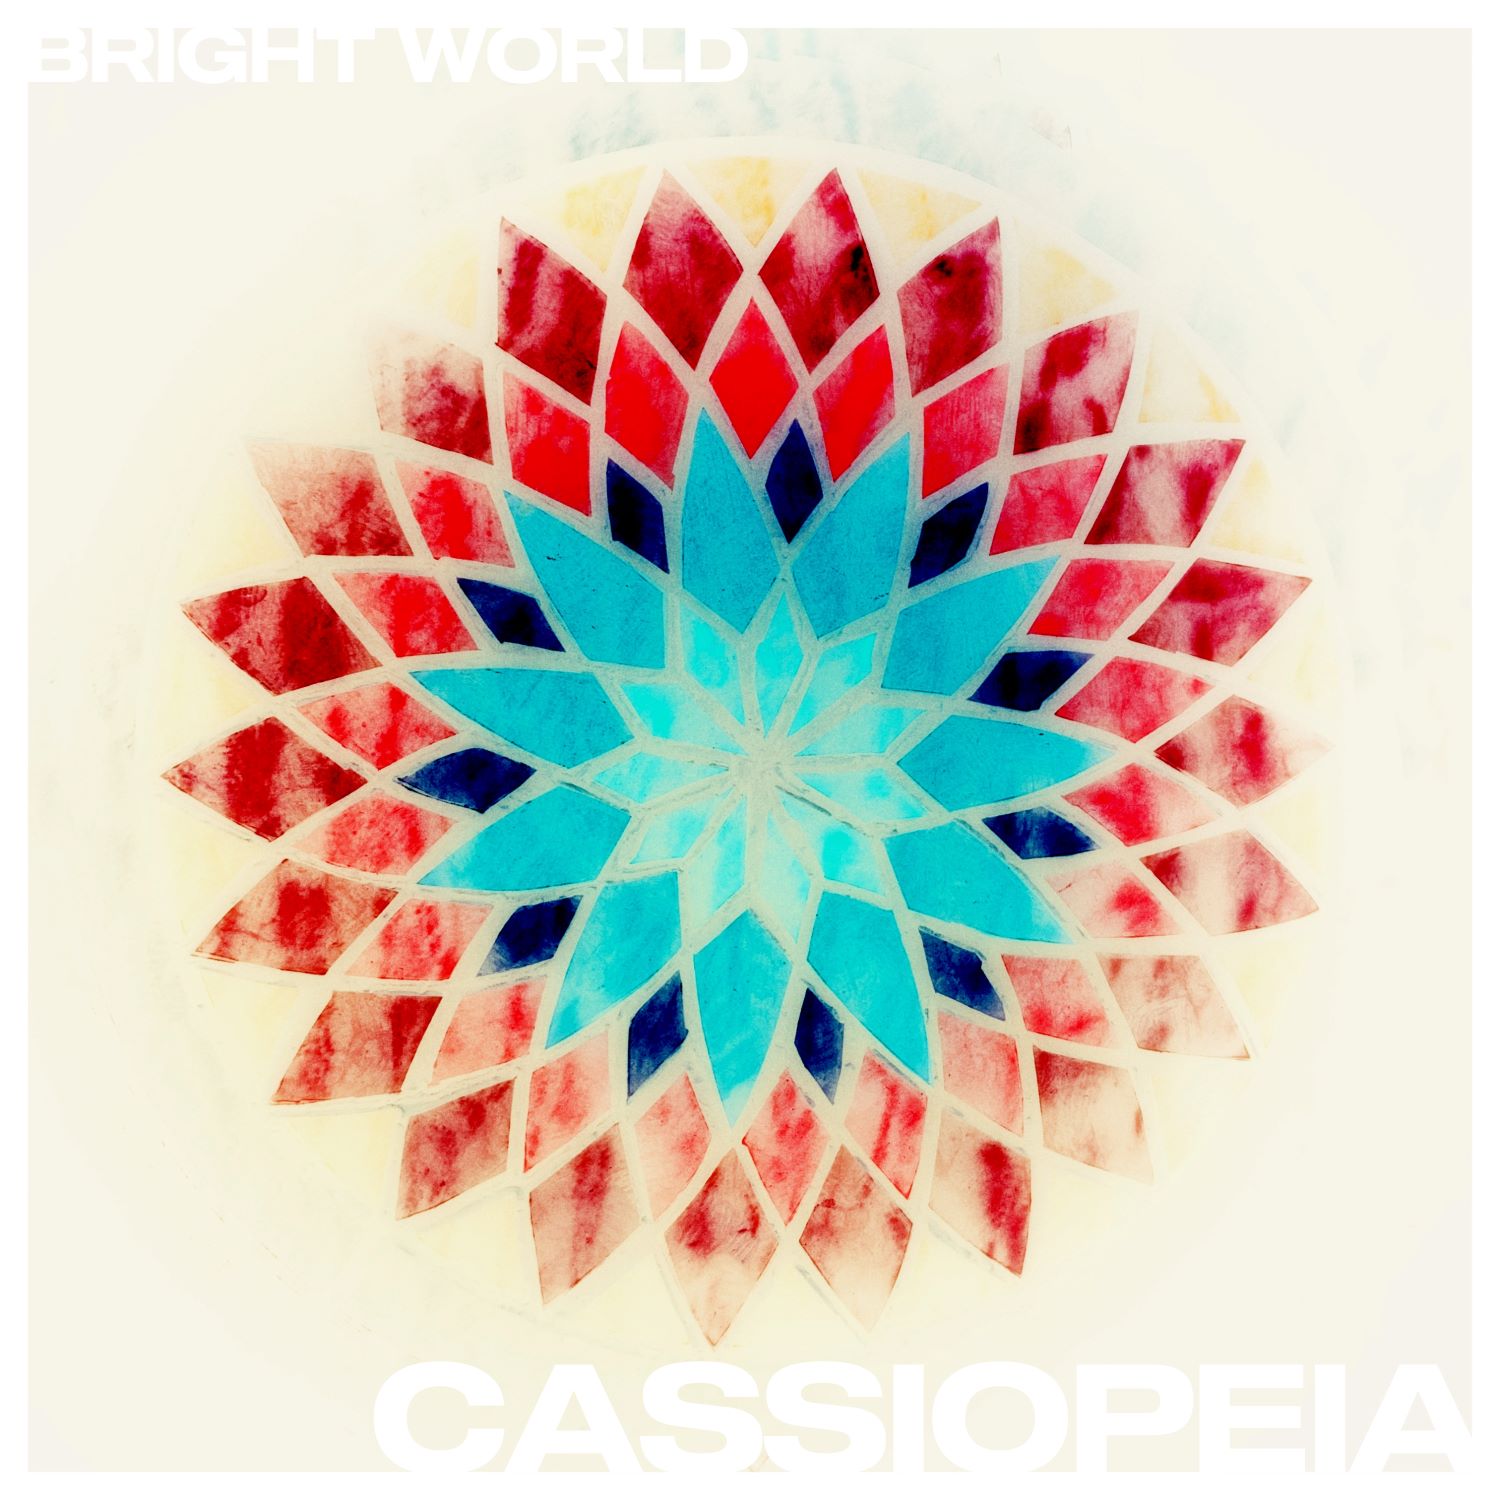 Bright World - "Cassiopeia" for Alt & Indie New Music Friday